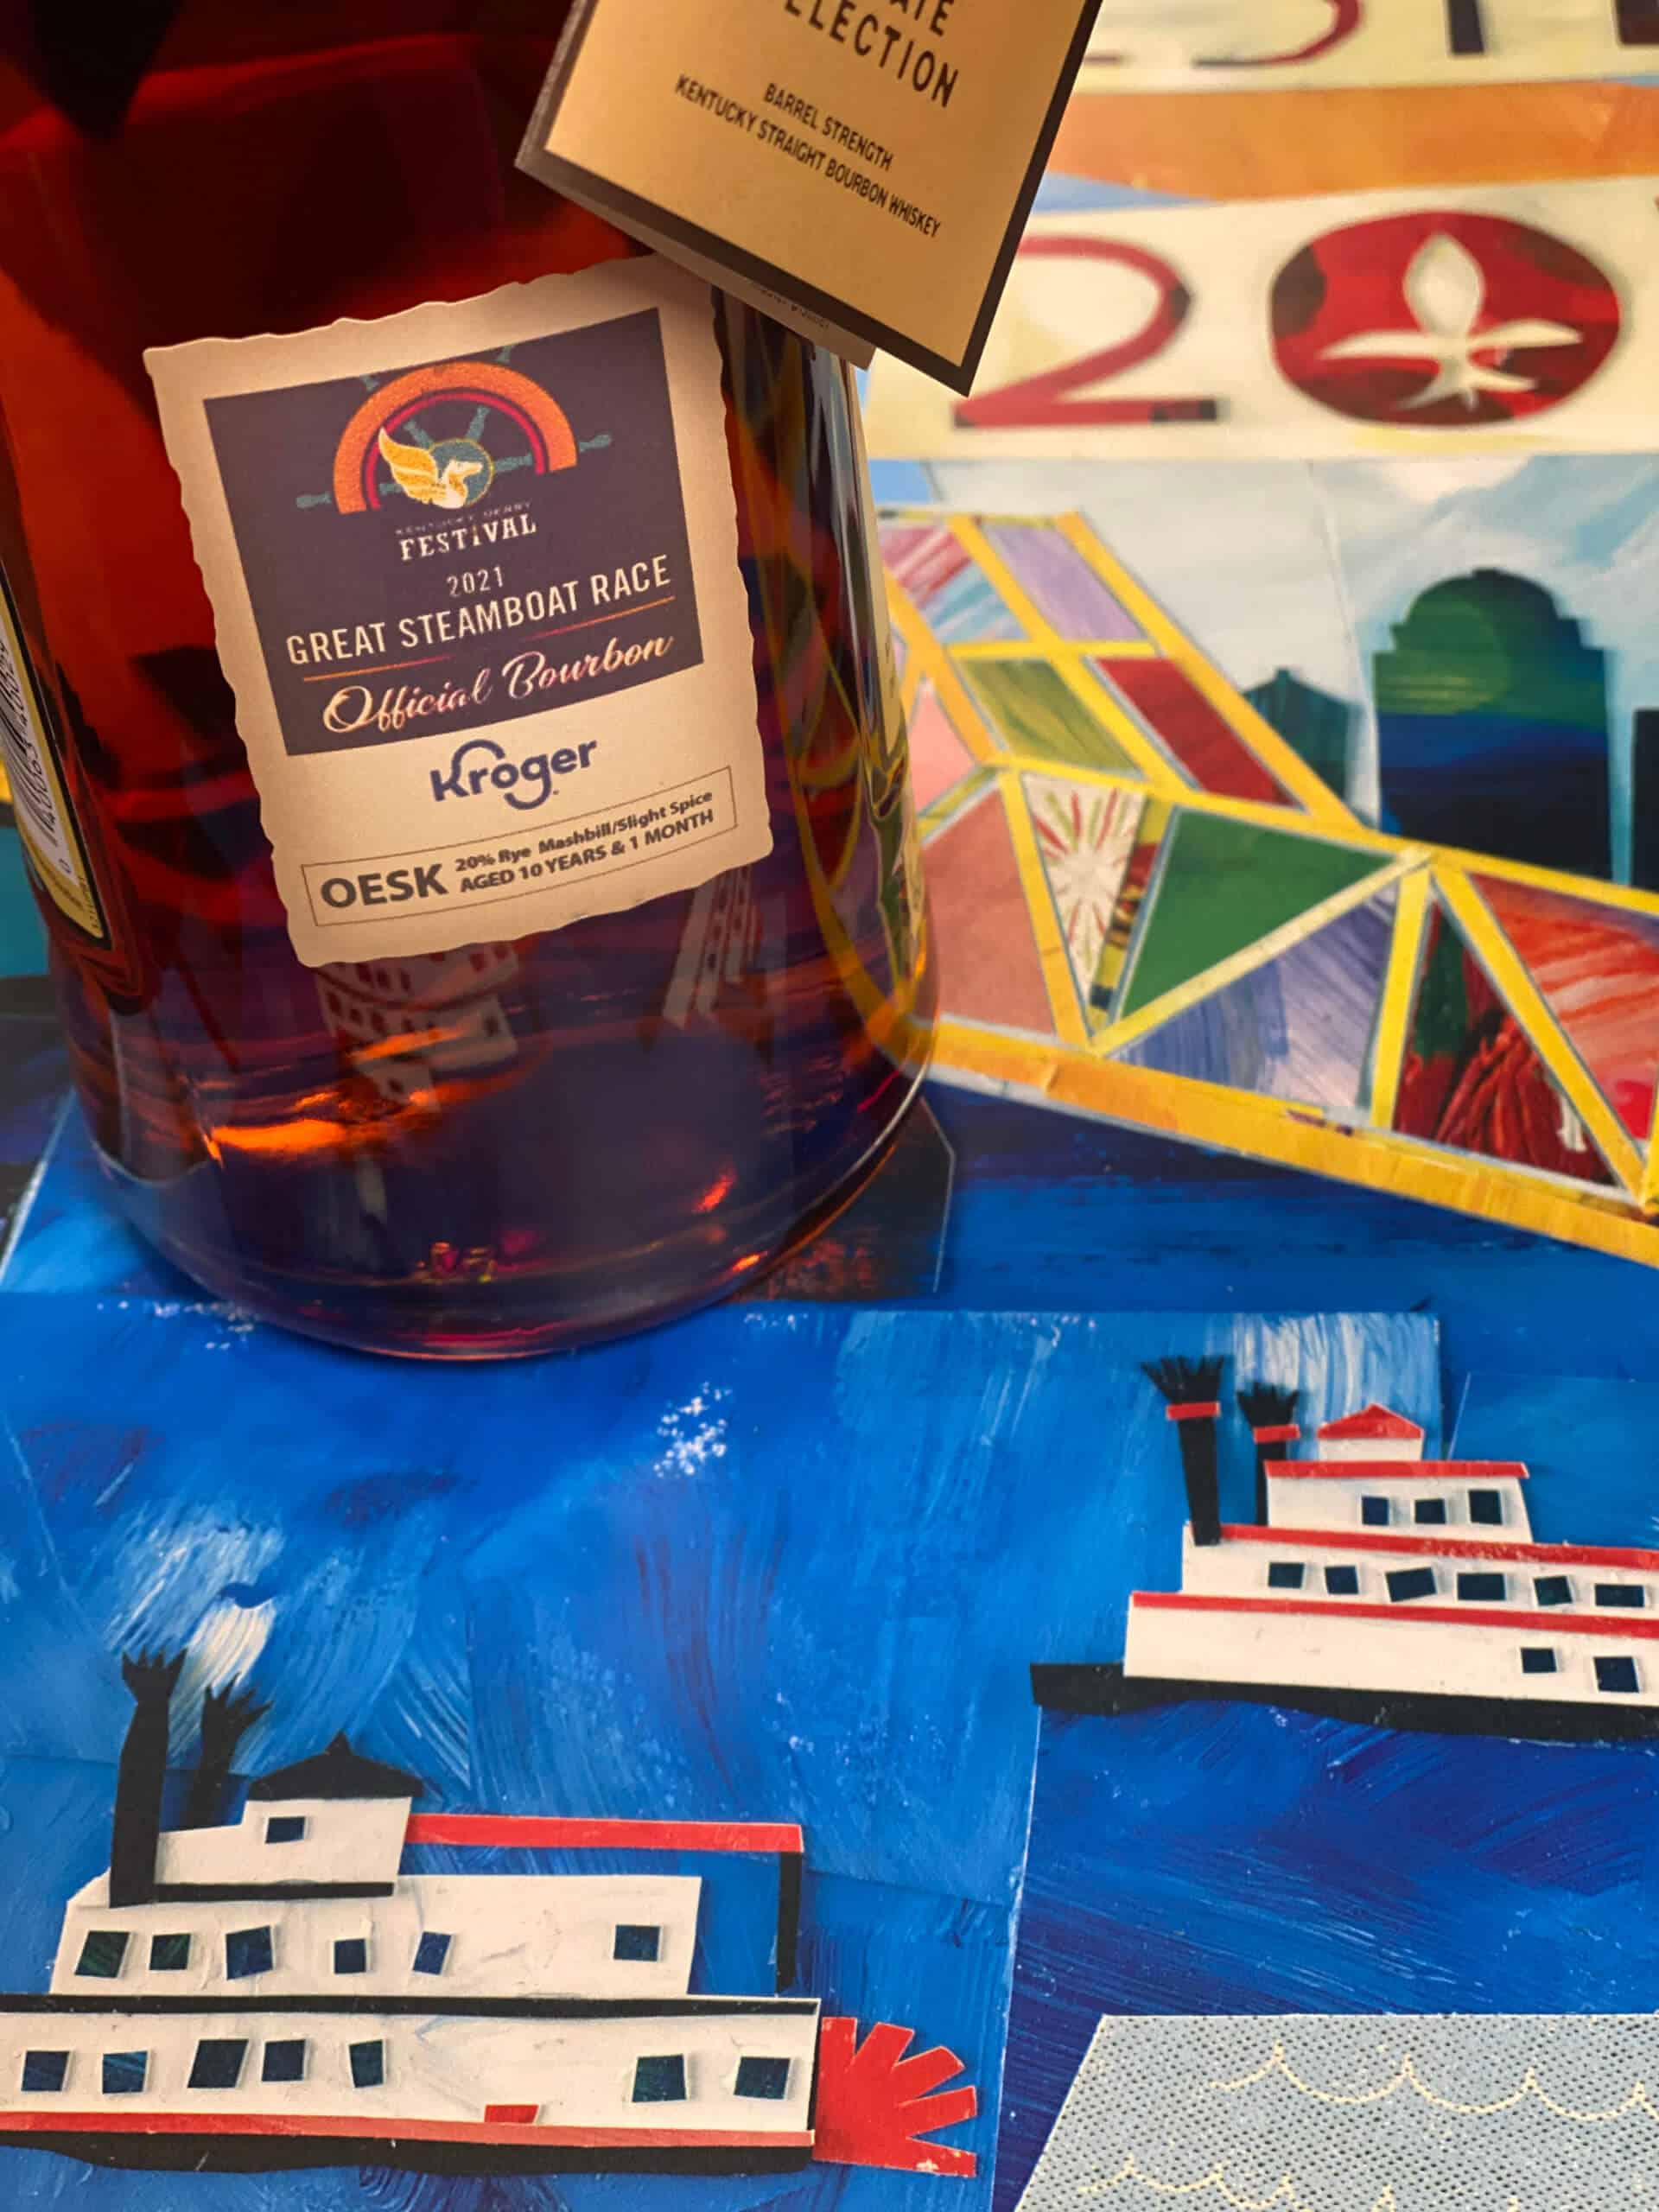 FourRoses Steamboat1 scaled - Four Roses Commemorates Kentucky Derby Festival Great Steamboat Race with Limited-release Single Barrel Bourbon Bottling